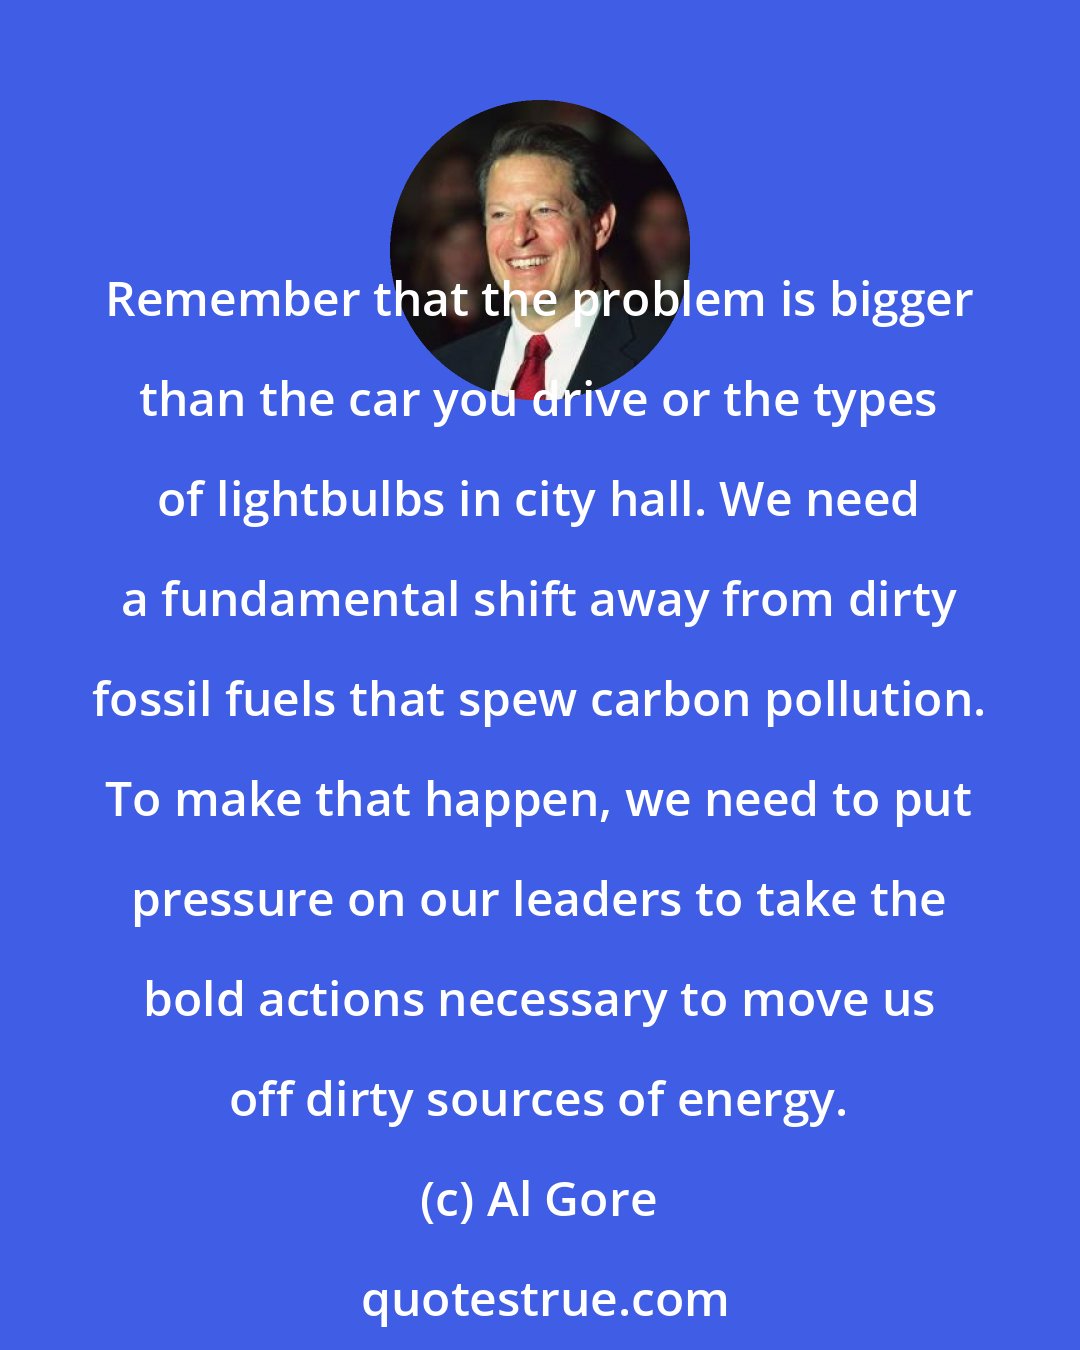 Al Gore: Remember that the problem is bigger than the car you drive or the types of lightbulbs in city hall. We need a fundamental shift away from dirty fossil fuels that spew carbon pollution. To make that happen, we need to put pressure on our leaders to take the bold actions necessary to move us off dirty sources of energy.